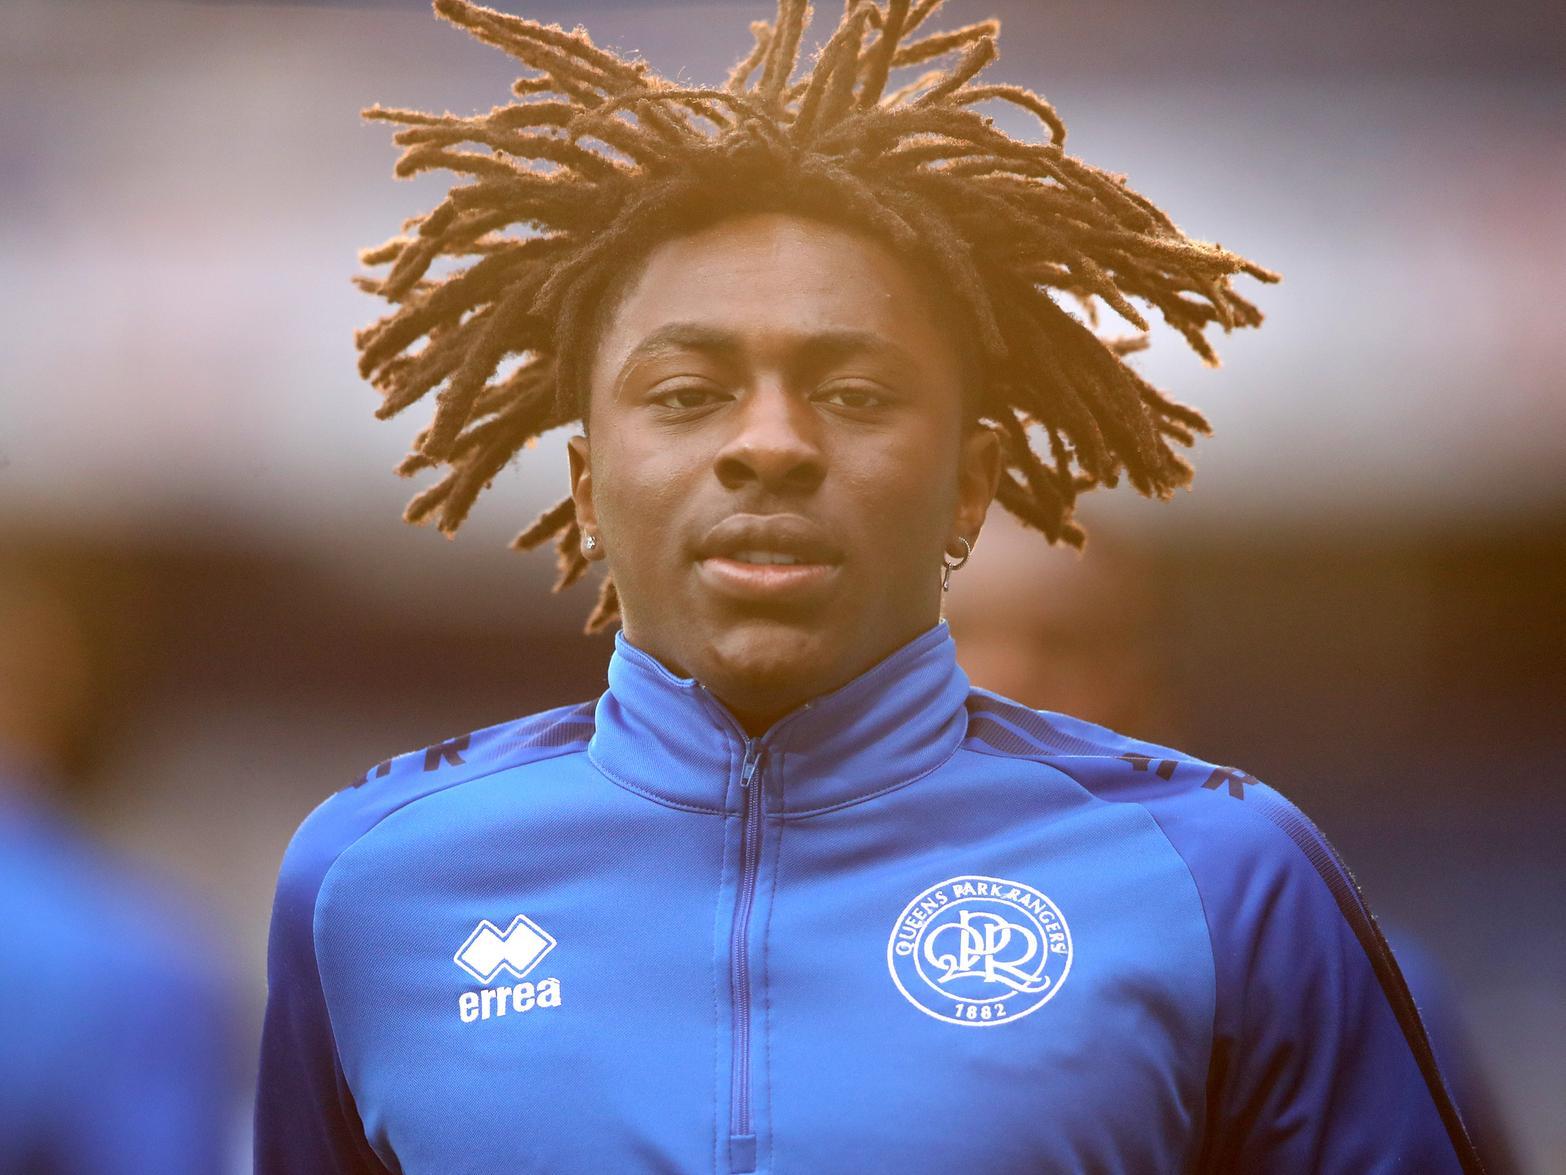 Sheffield United are said to be keeping tabs on QPR's midfield star Eberechi Eze, who could be available for around 12m should the Blades look to pursue a move. (Various)